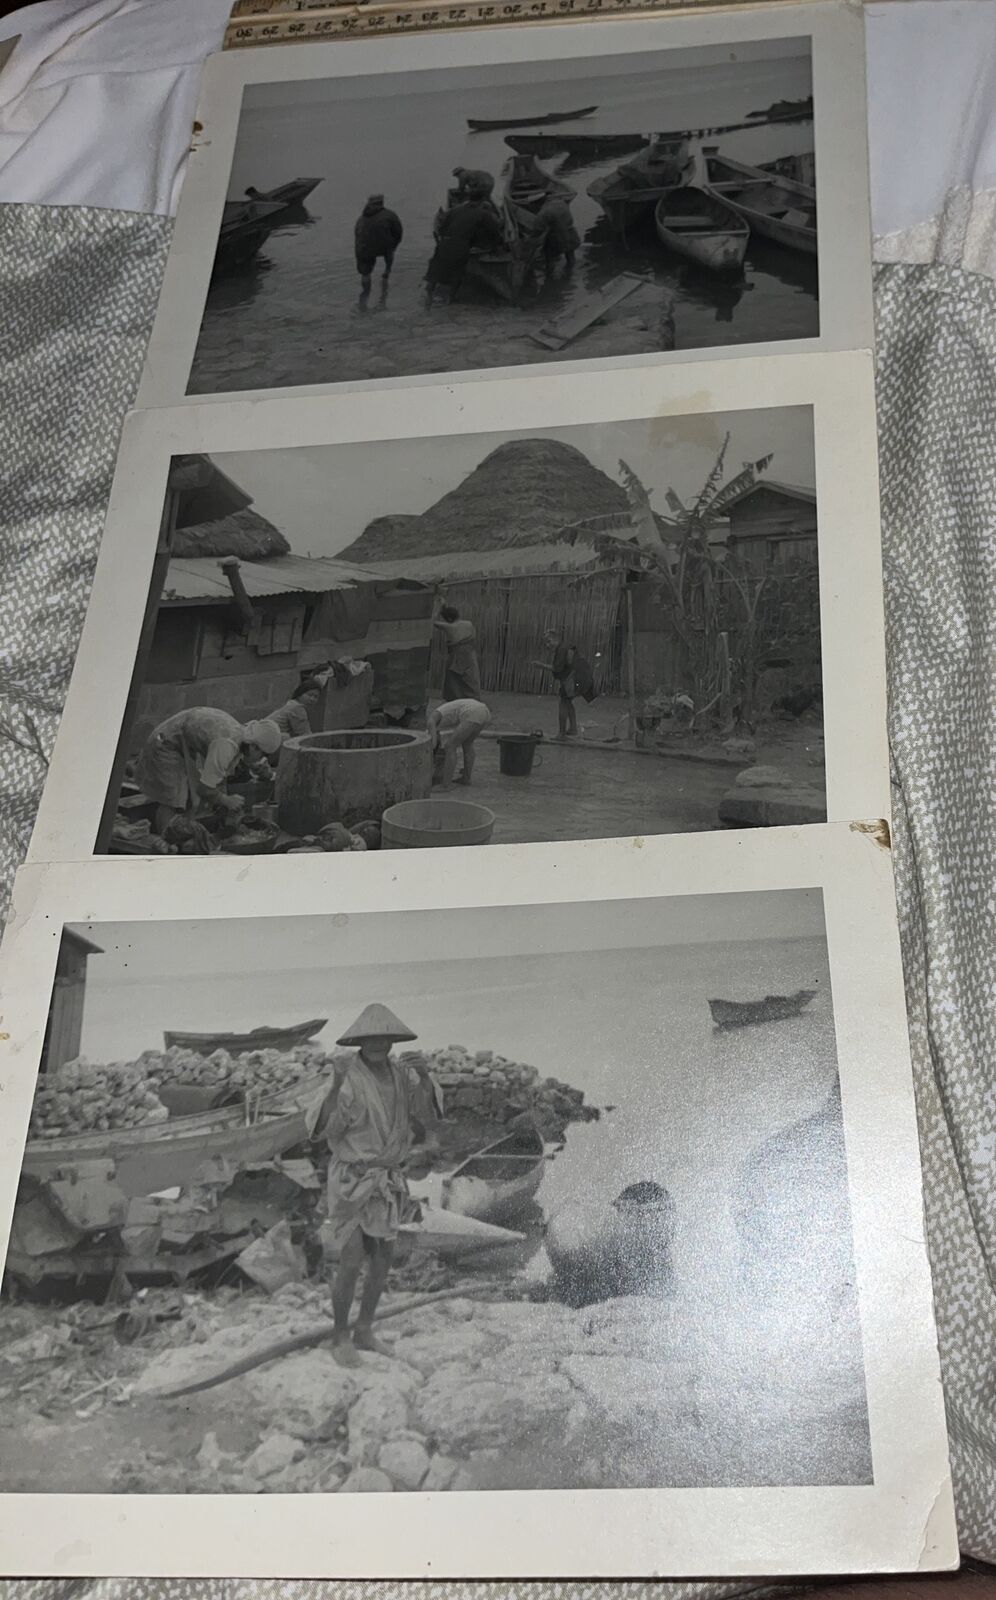 3 Vintage Photos of Asian Village Life and Culture, Nautical Boating Fishing